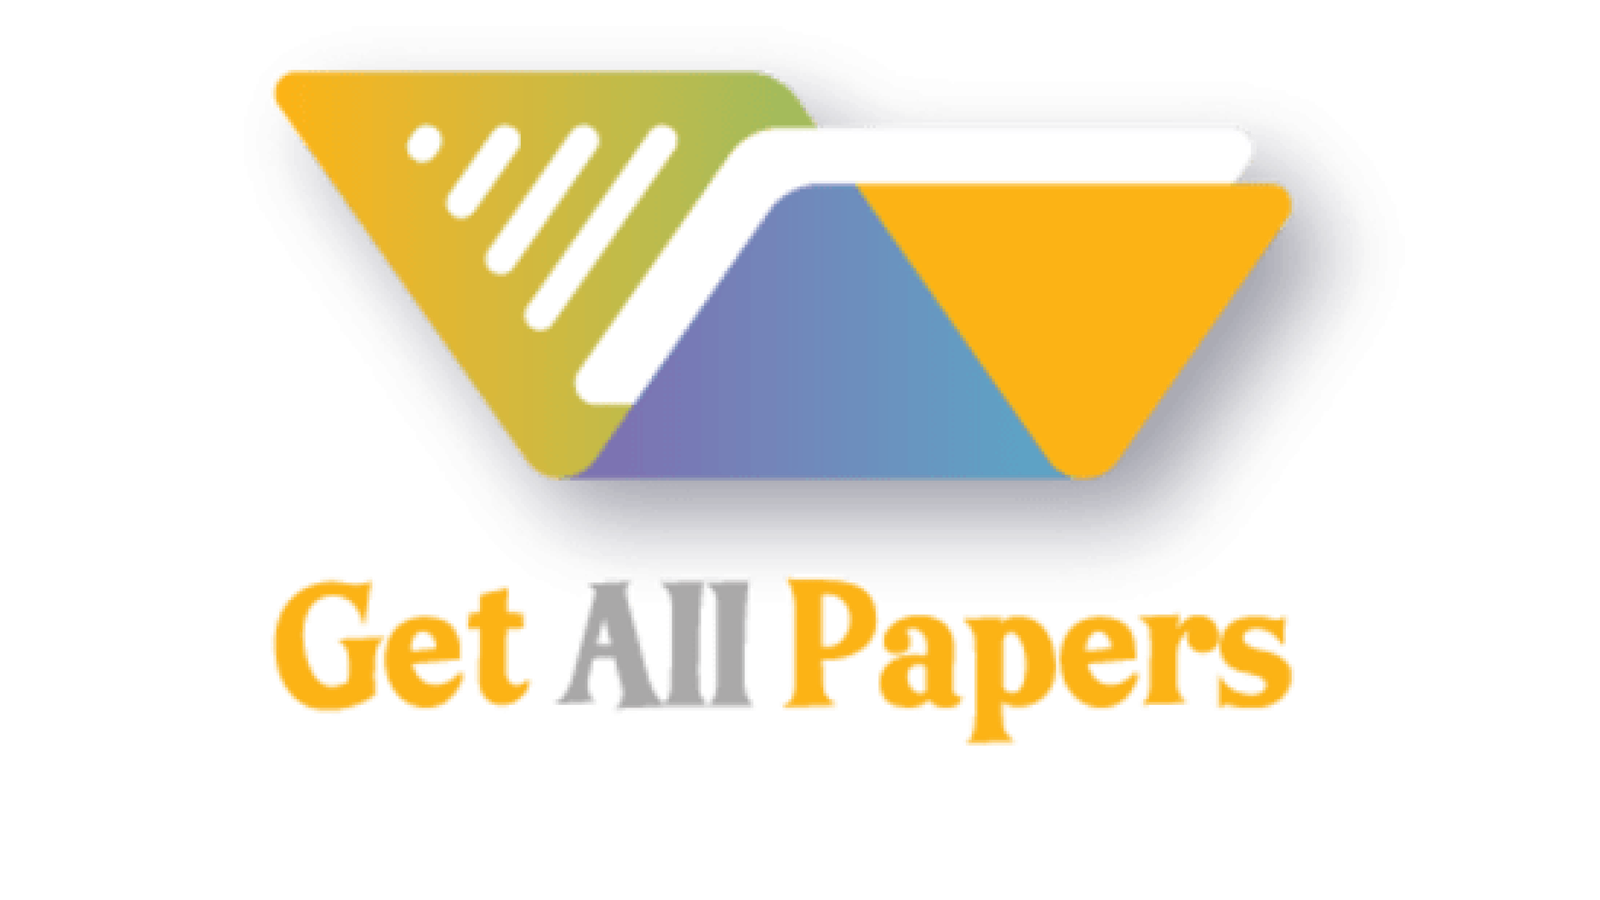 Get All Papers